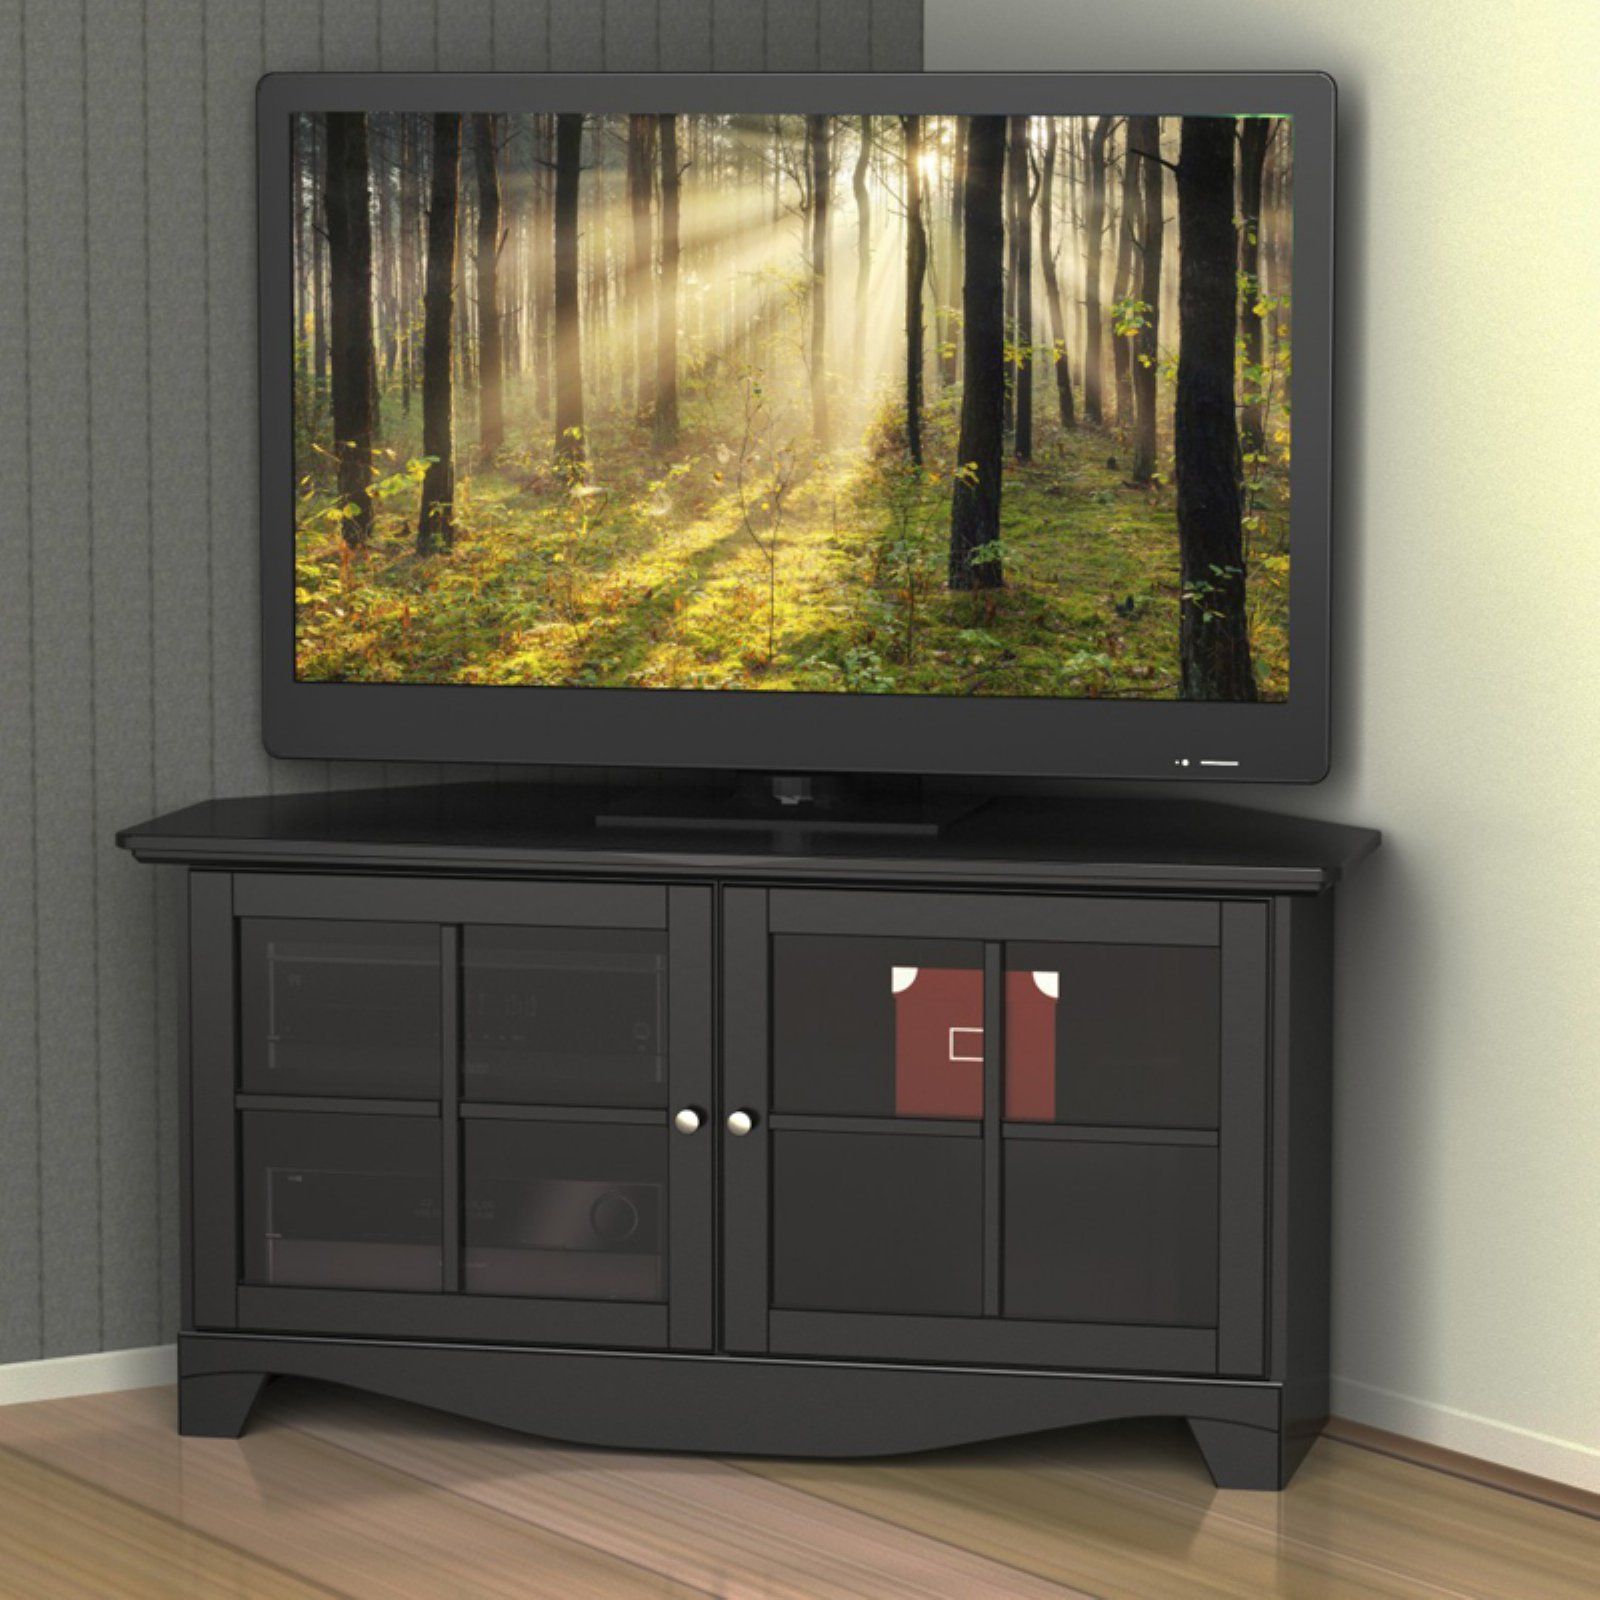 Nexera Pinnacle Black 2 Door Corner Tv Stand For Tvs Up To With Tv Stands For Corners (View 11 of 15)